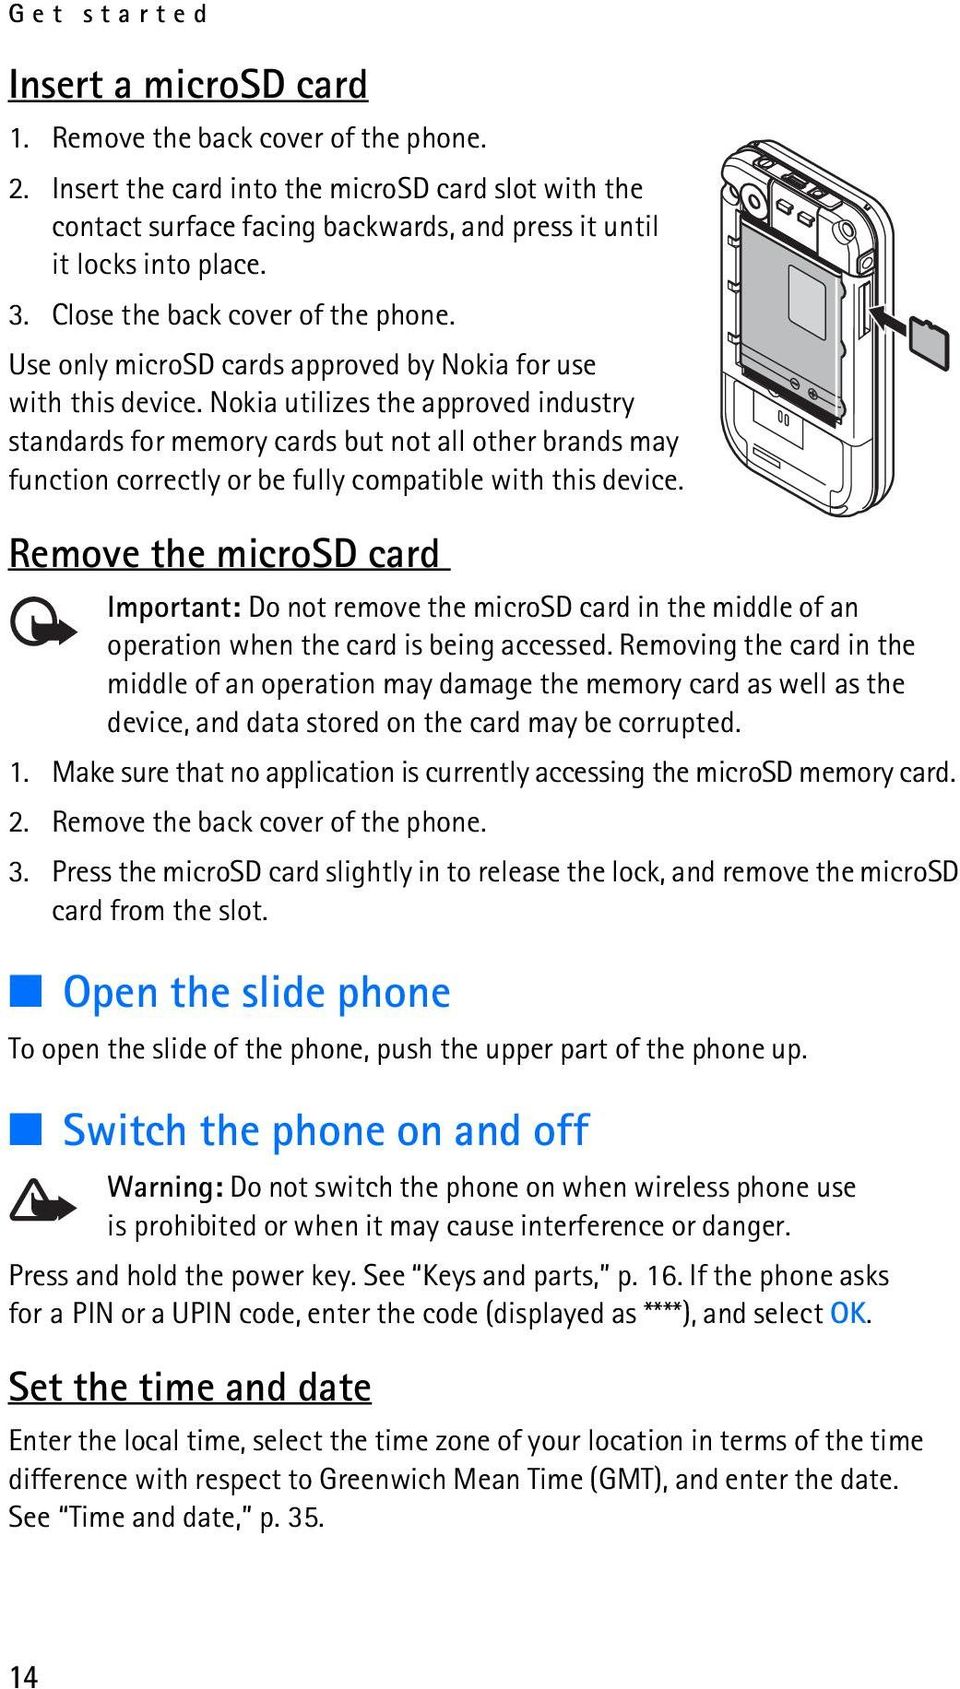 Use only microsd cards approved by Nokia for use with this device.